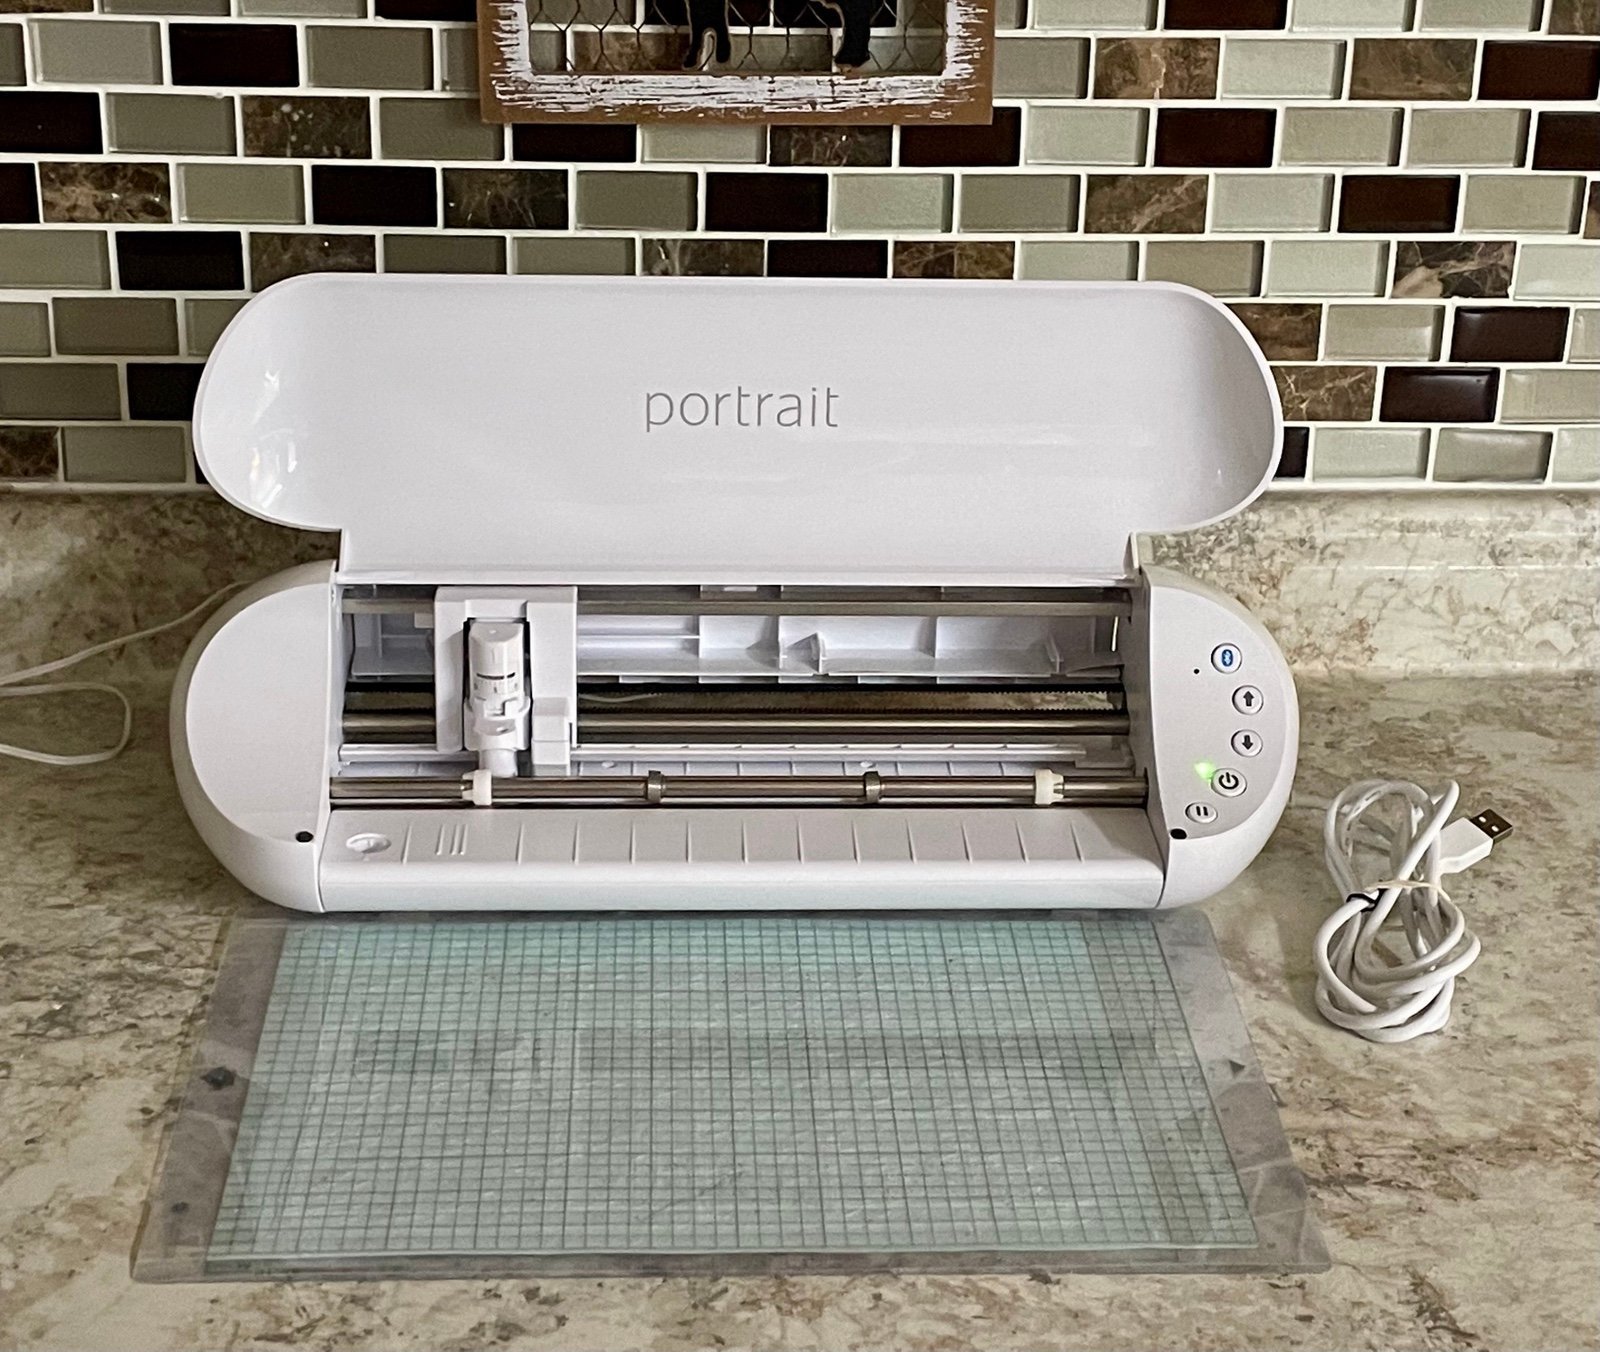 INCLUDES: Cricut 3, Silhouette Portrait & INTUOS PAD & PEN. SEE BELOW! 24Ag7w1uD